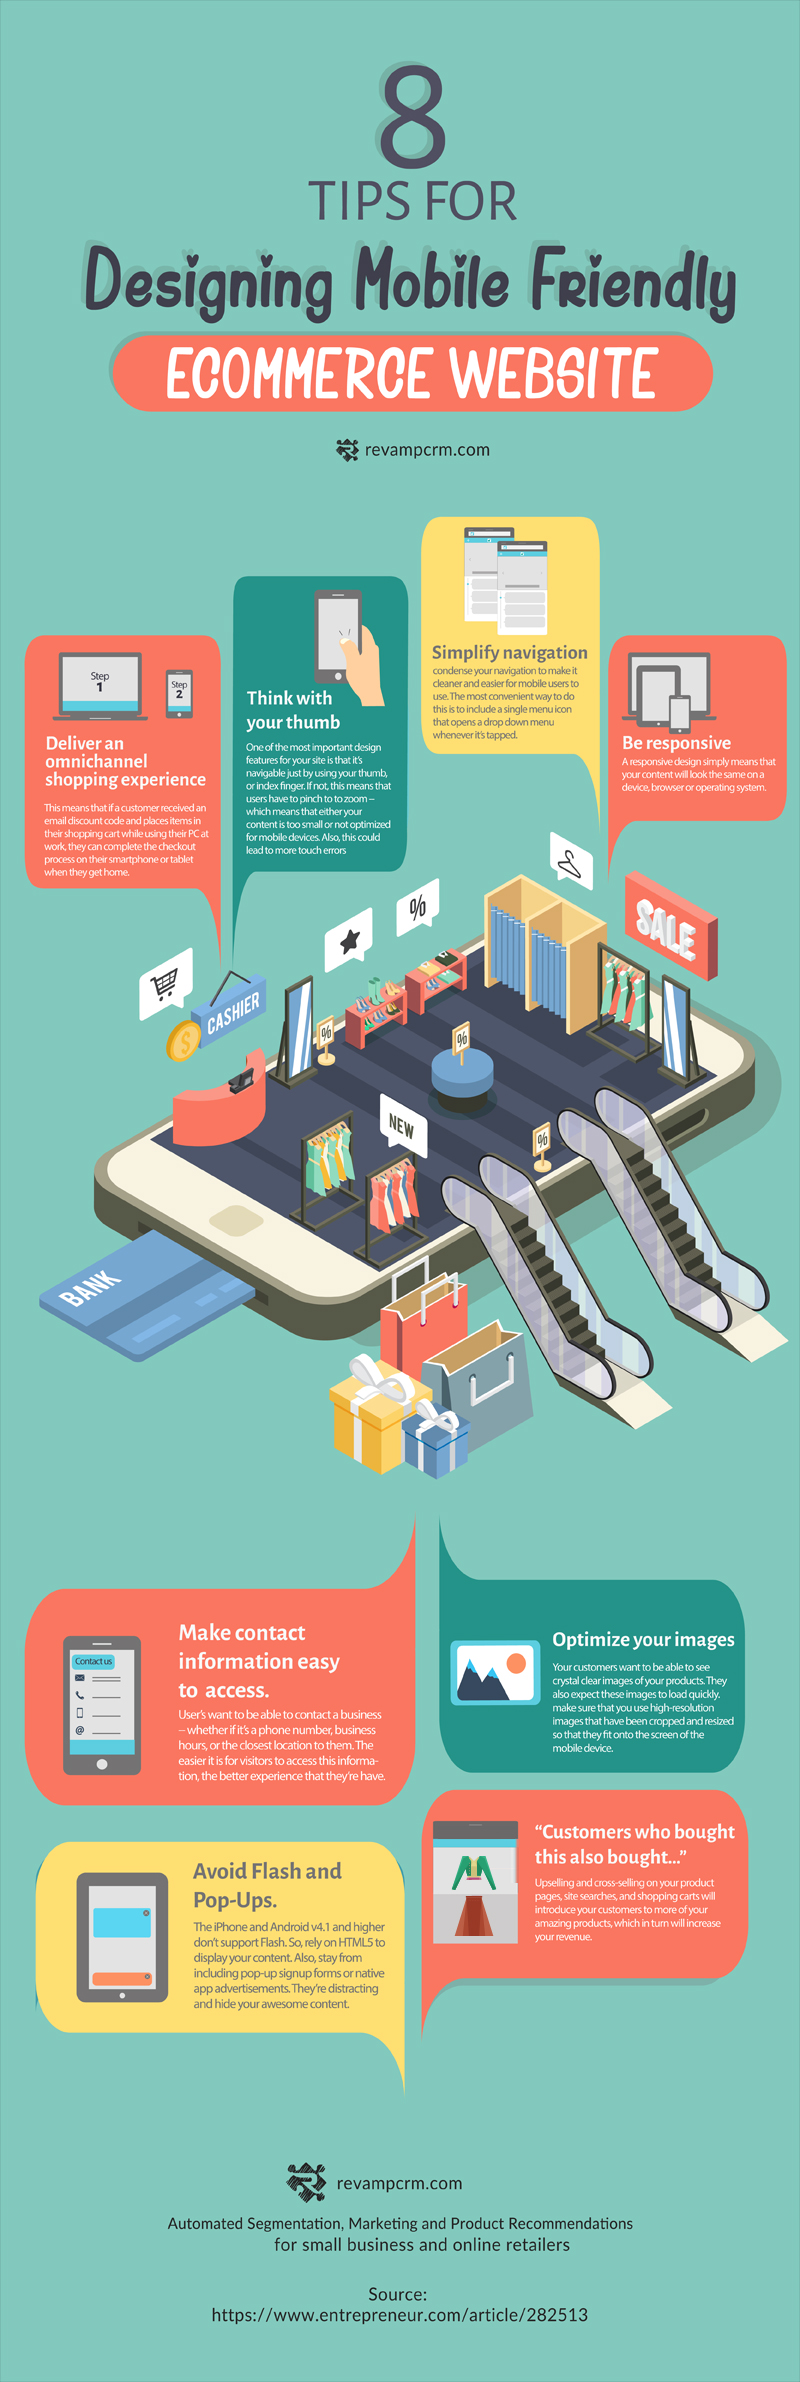 8 Tips For Creating a Mobile Friendly Ecommerce Website [Infographic]